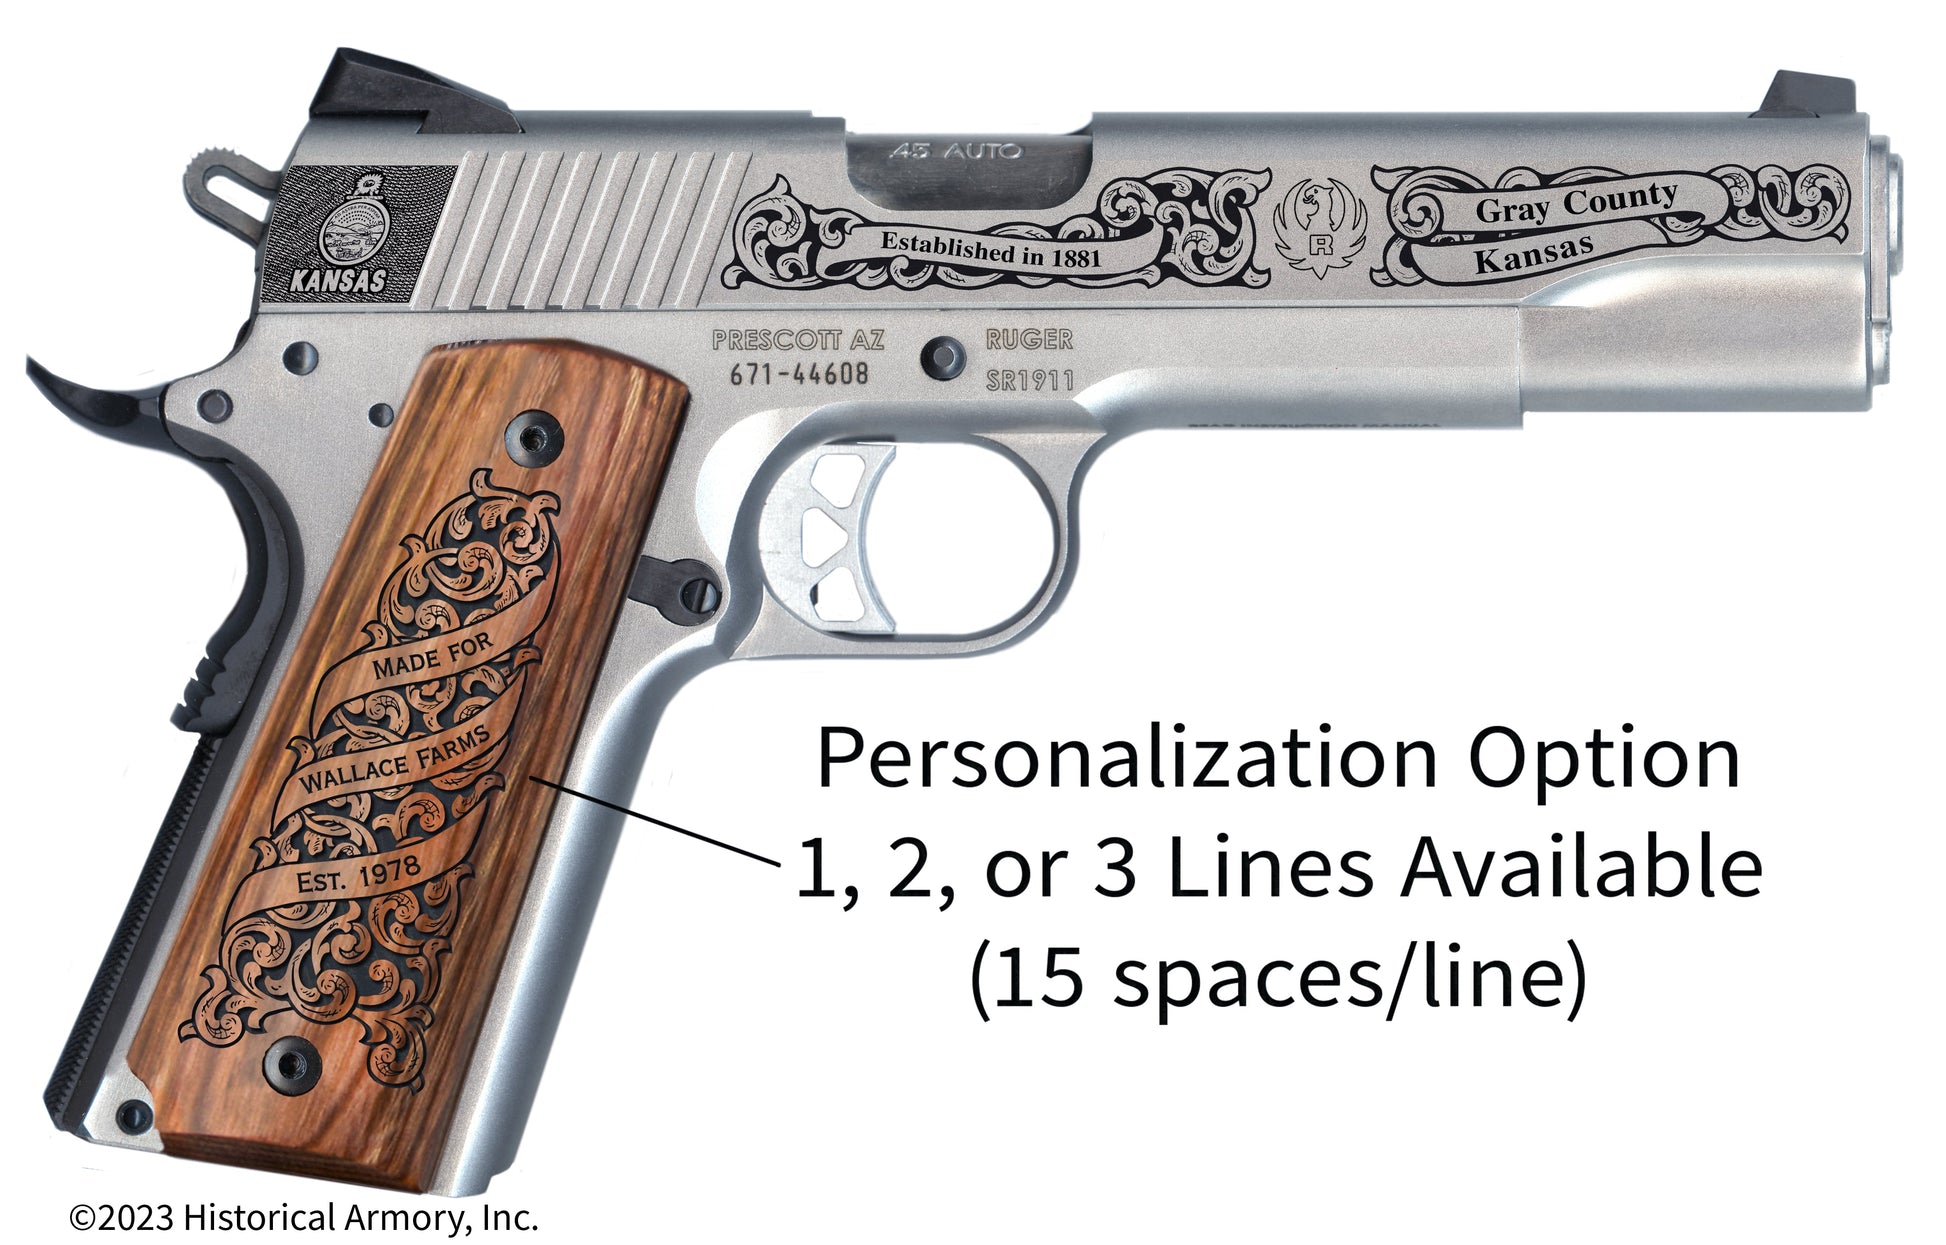 Gray County Kansas Personalized Engraved .45 Auto Ruger 1911